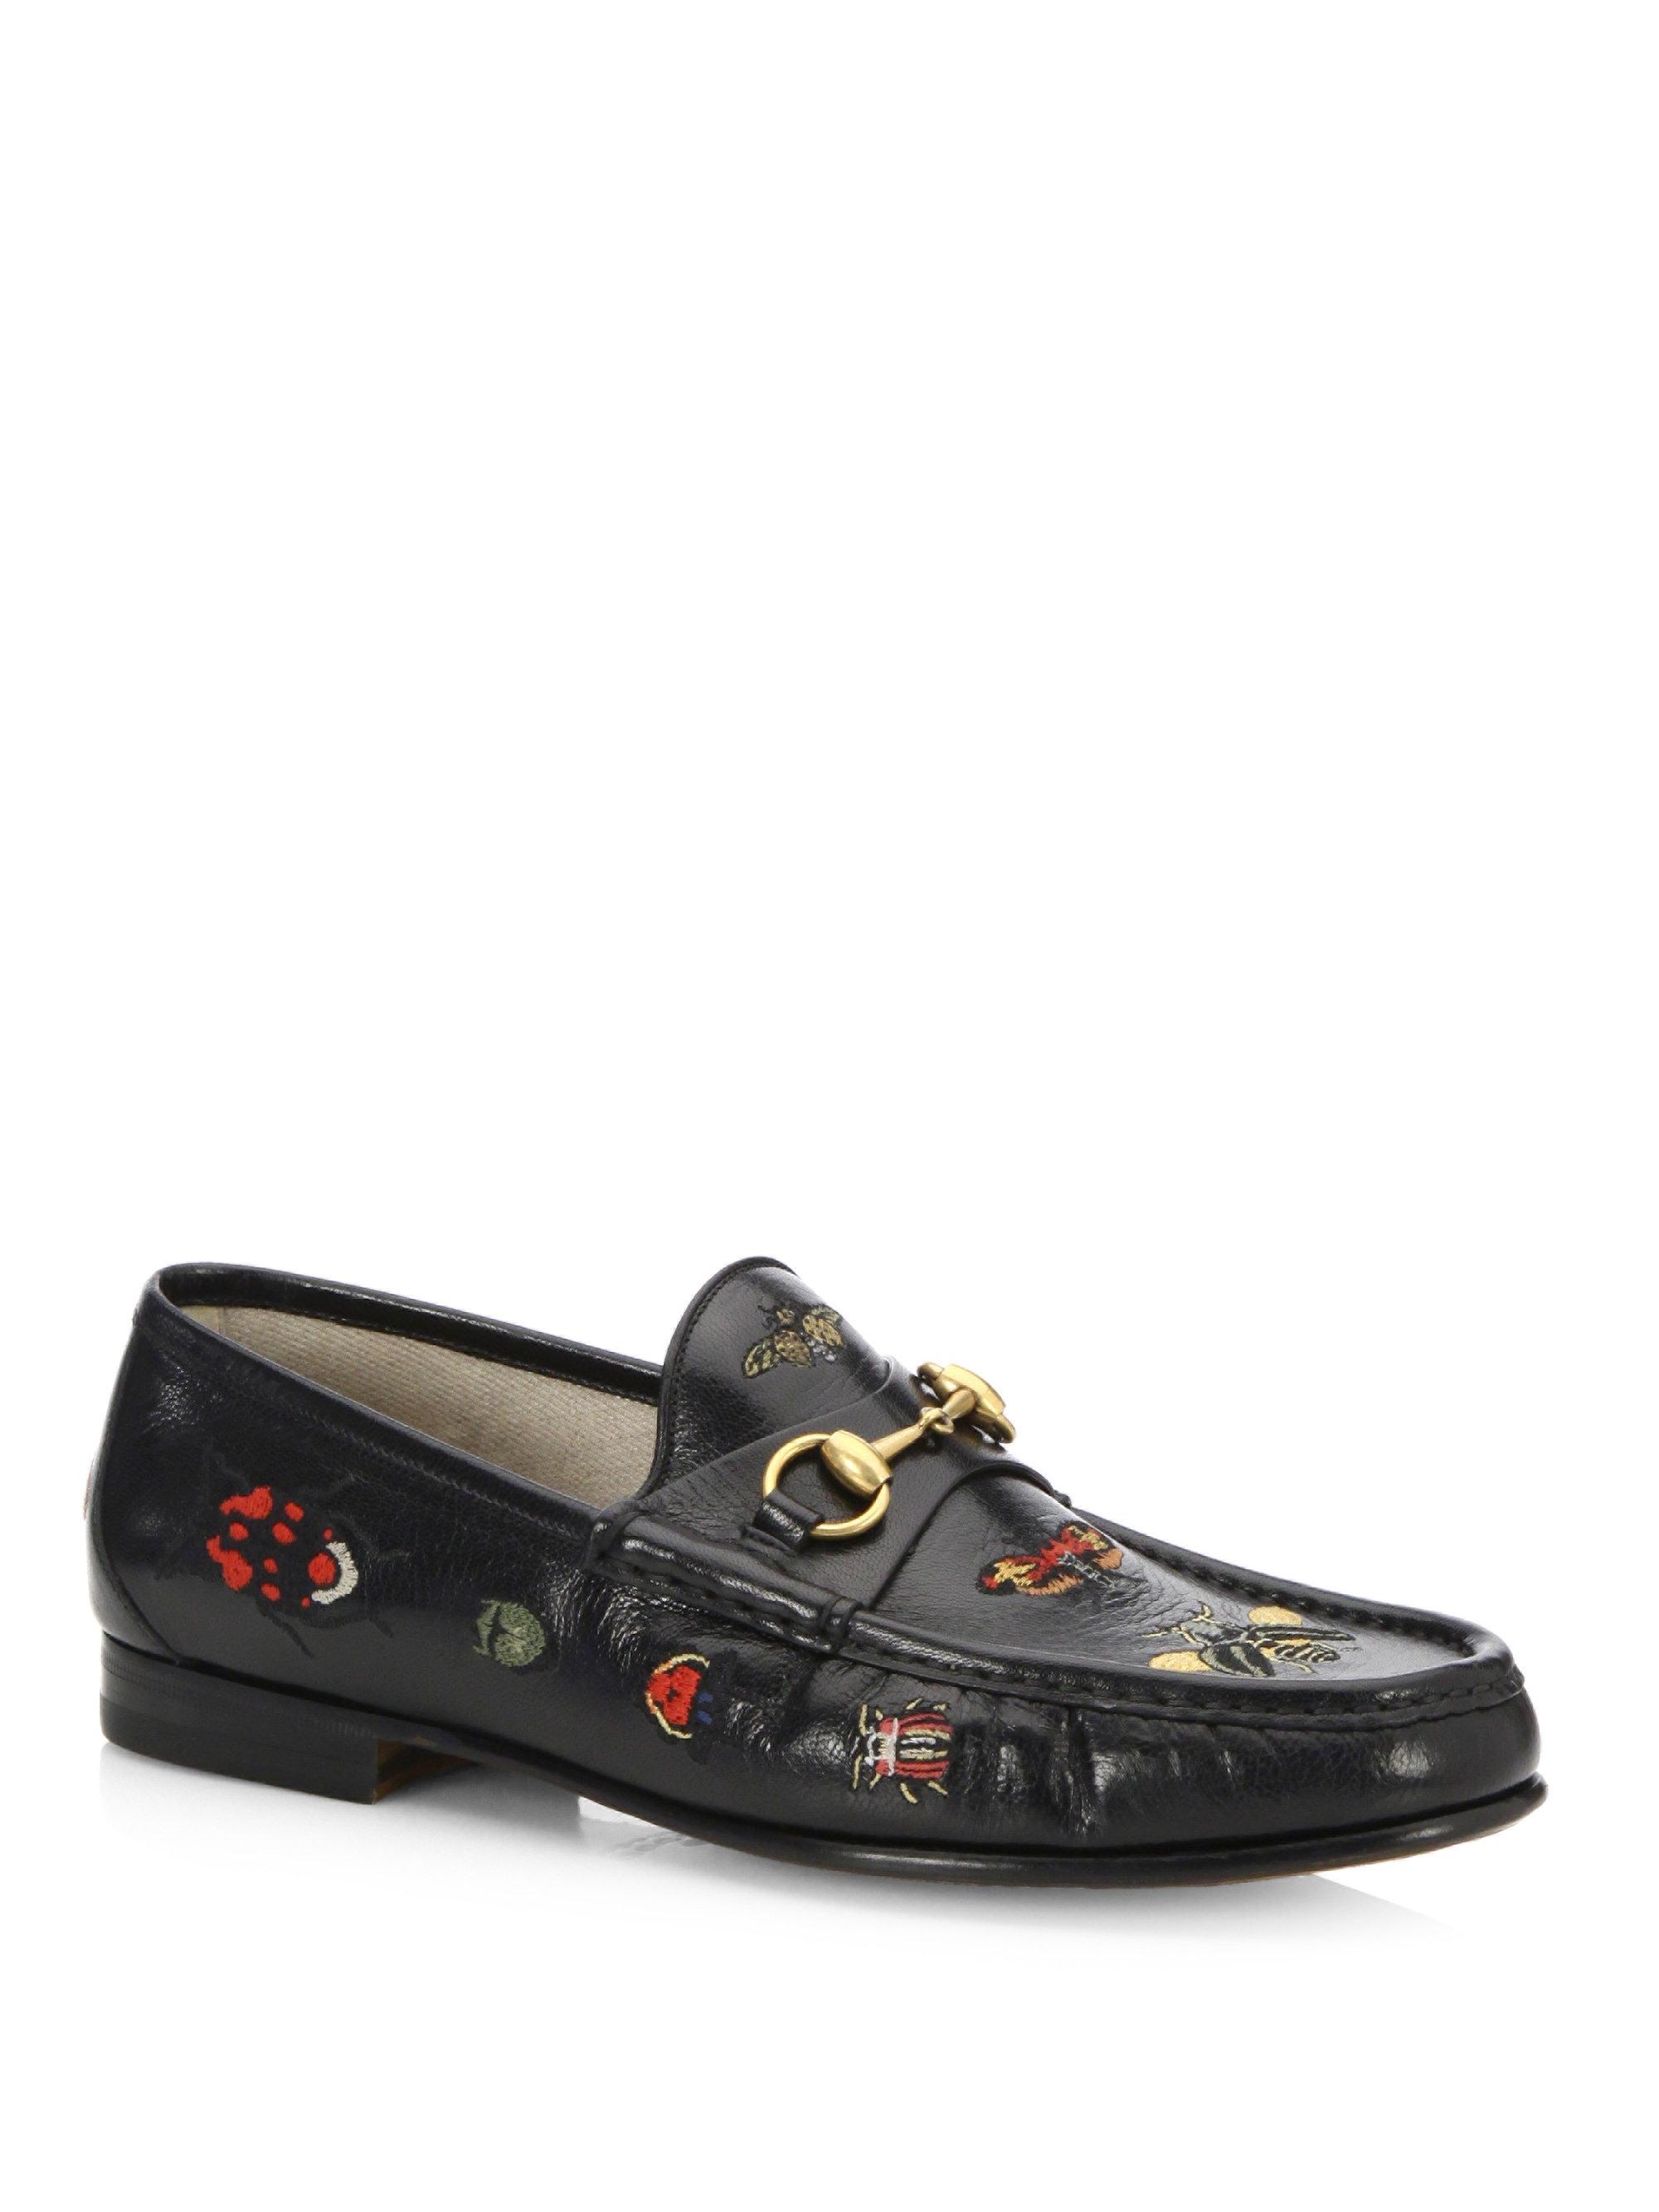 gucci shoes with bug